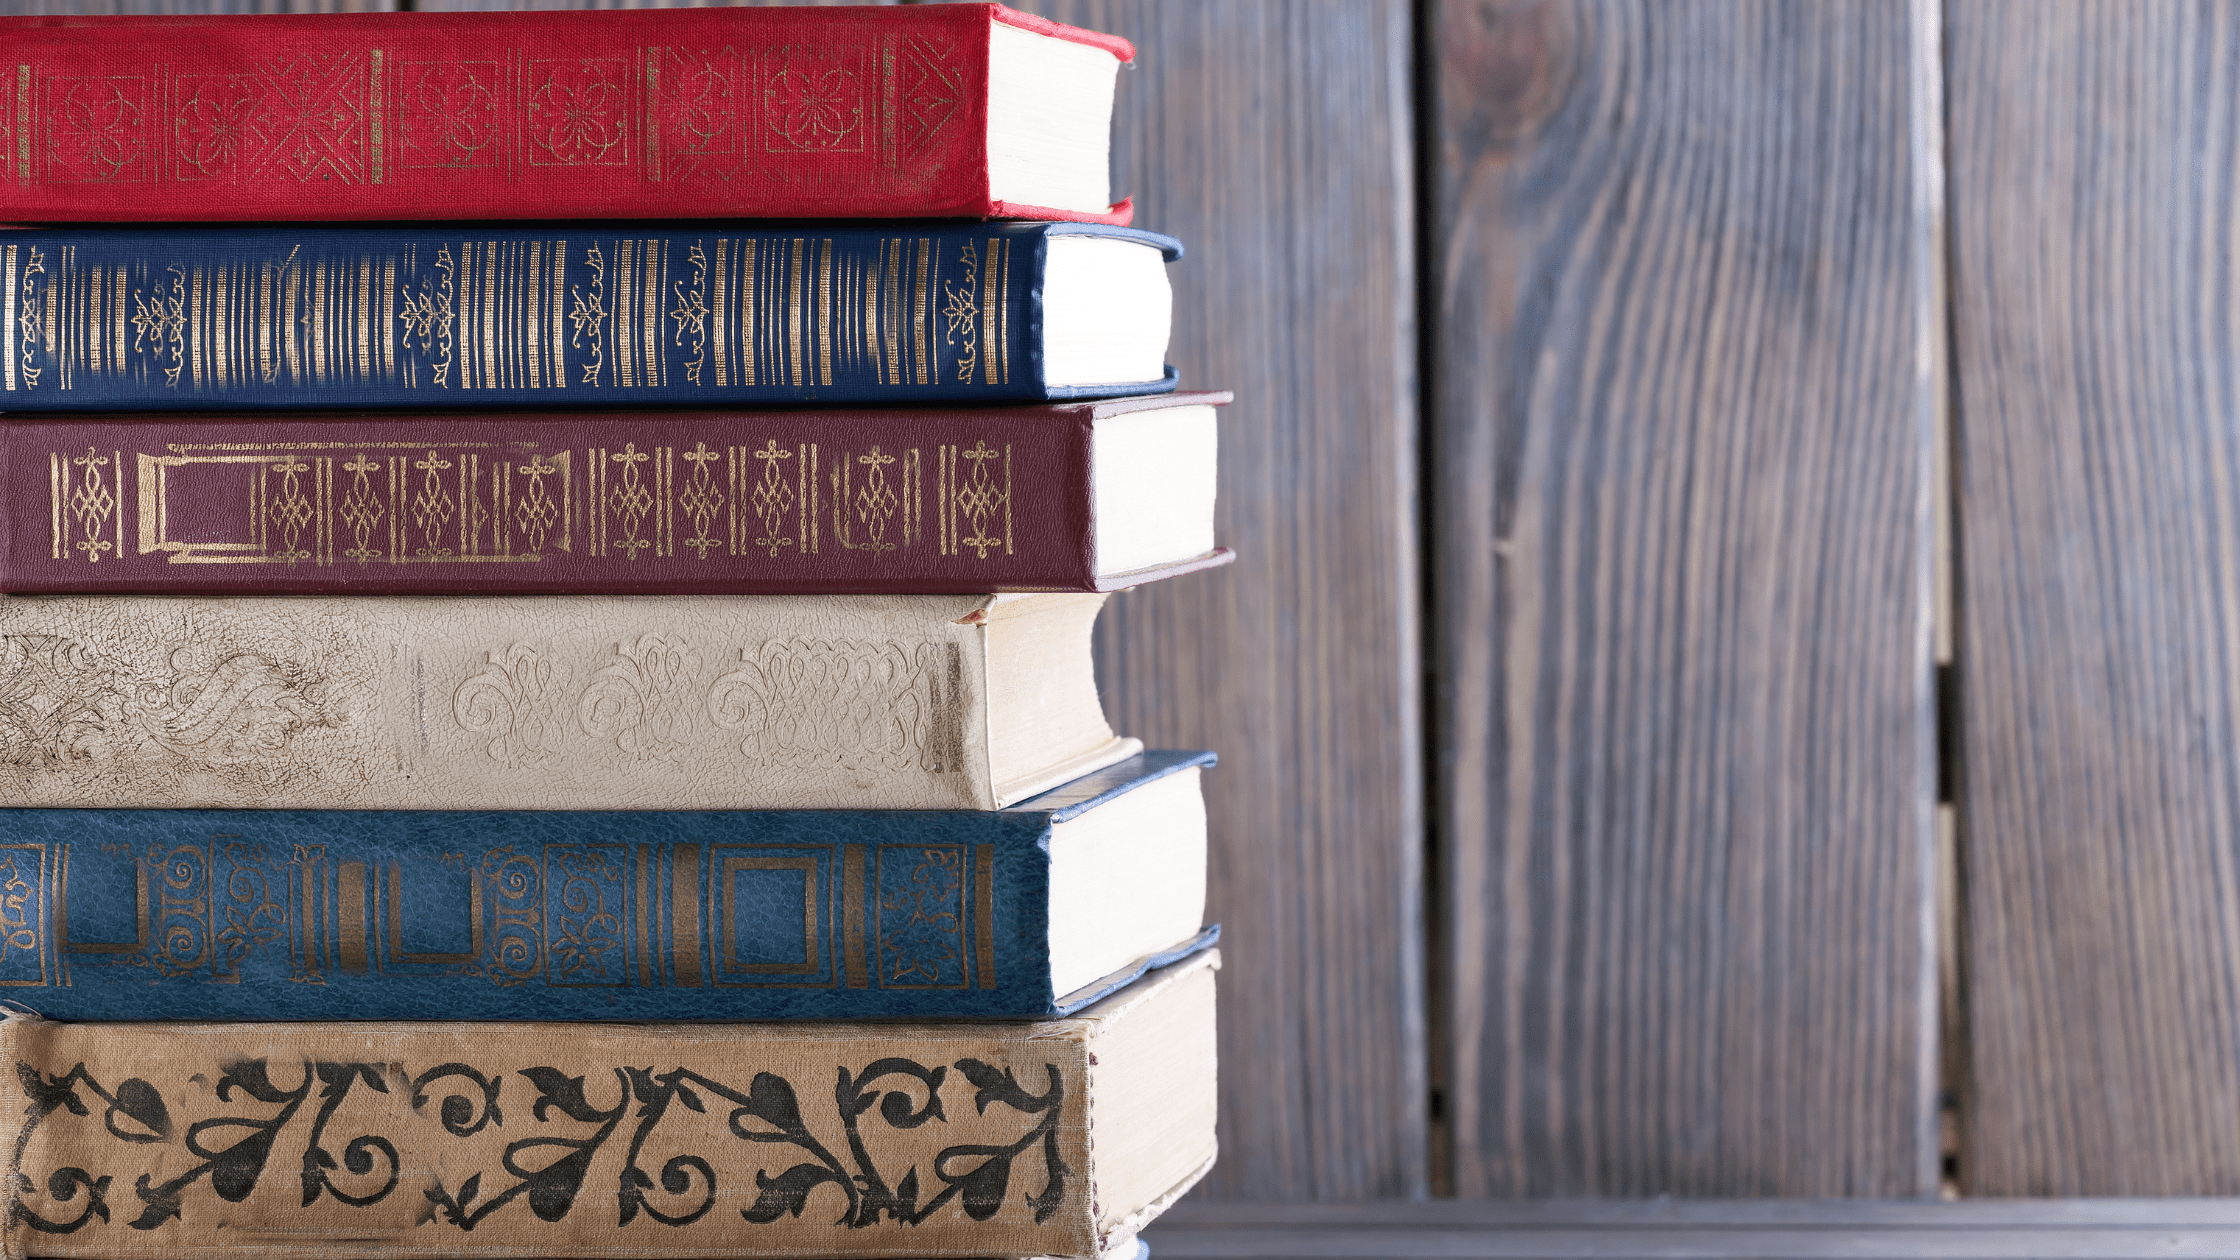 How to Read Classic Books: The Ultimate Guide